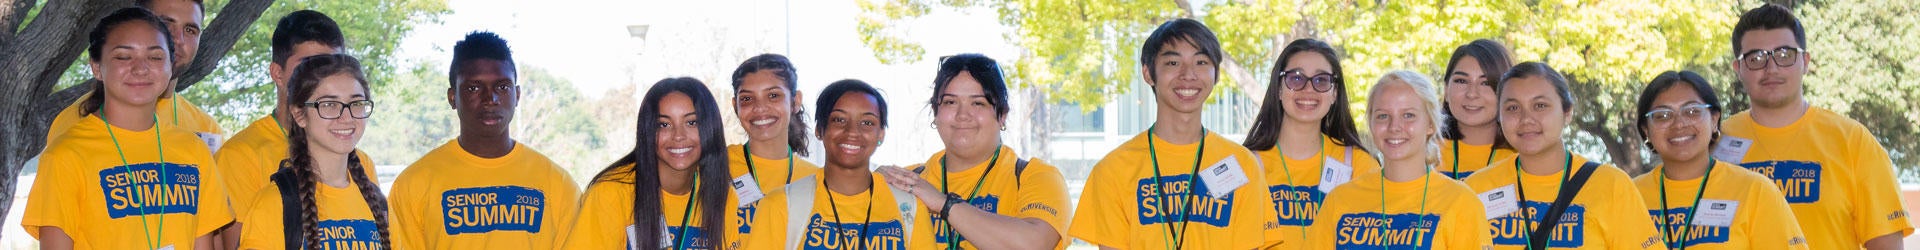 A large group of high school students gather UCR's Senior Summit